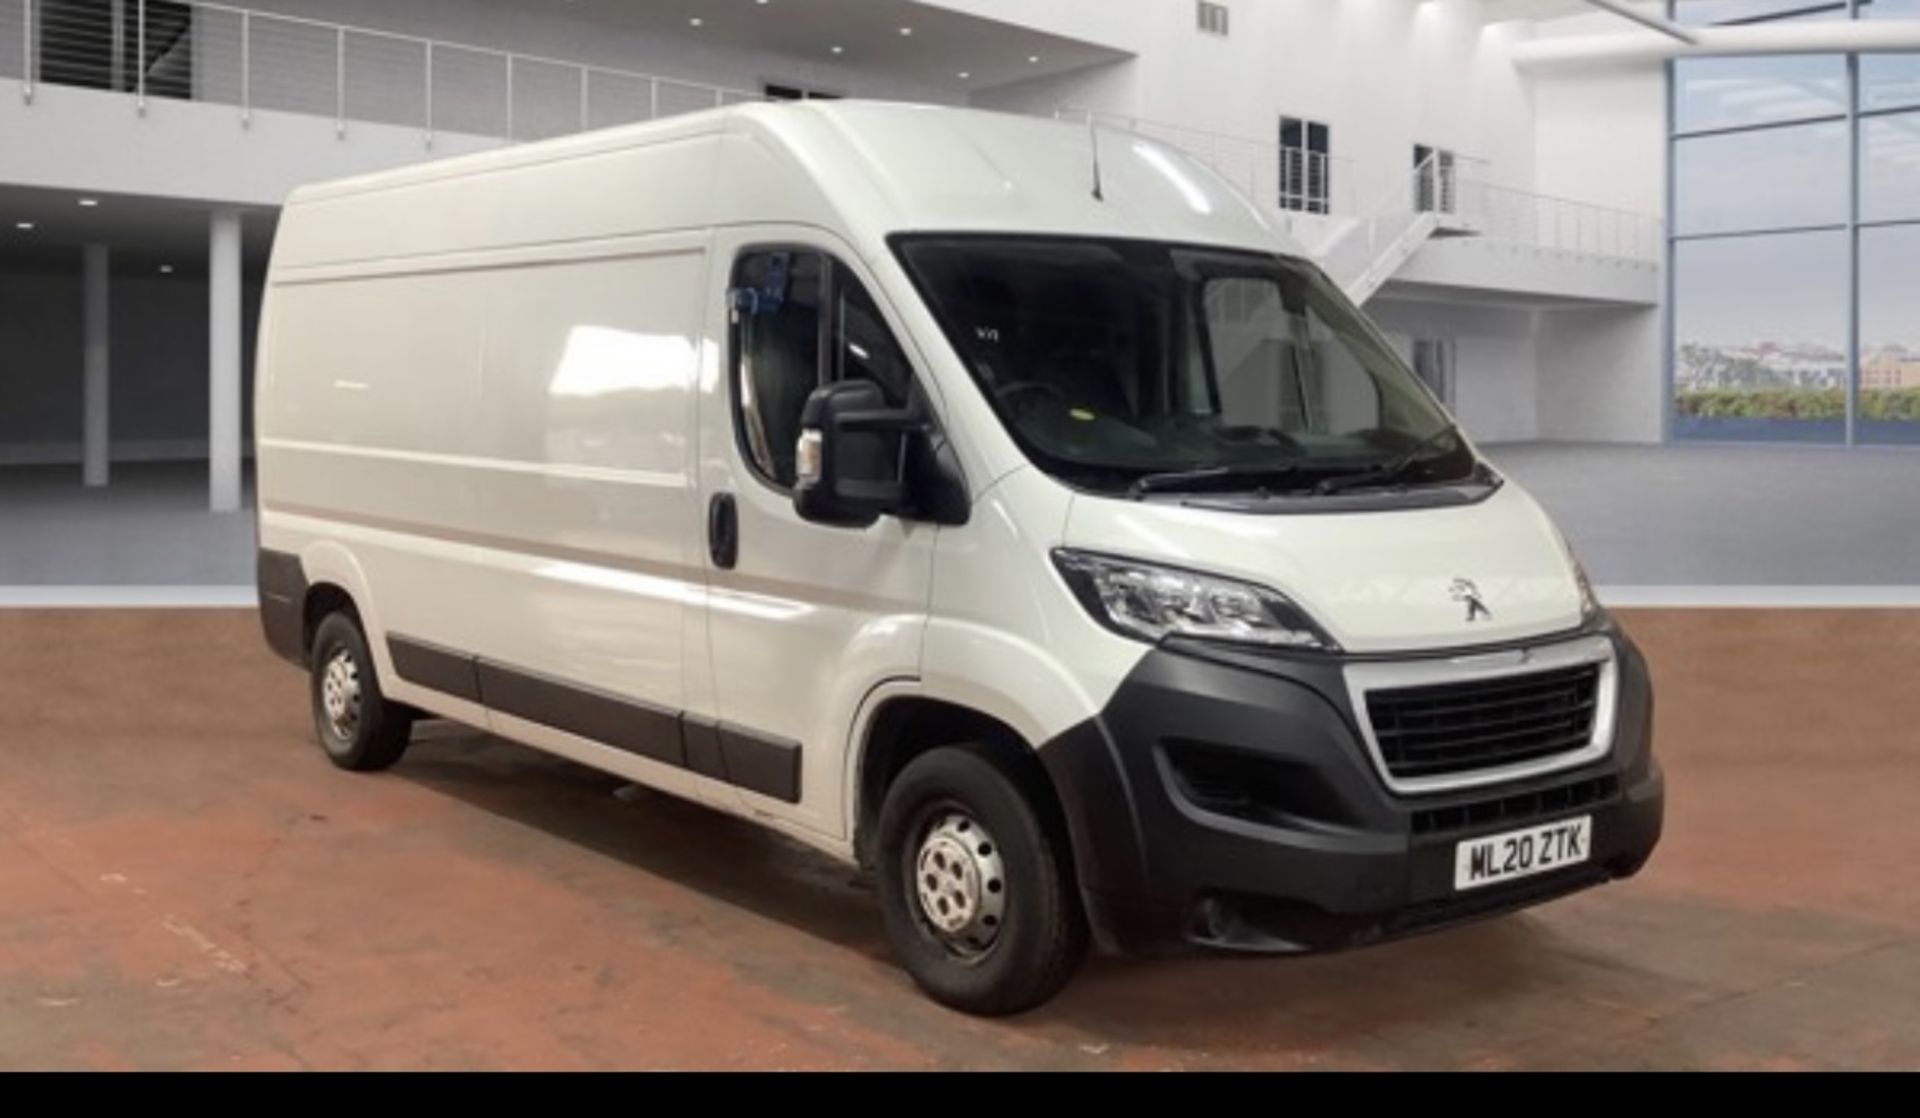 (ON SALE) PEUGEOT BOXER 2.2 "BLUE-HDI PROFESSIONAL "LONG WHEEL BASE" 20 REG - FSH- AIR CON - Image 3 of 12